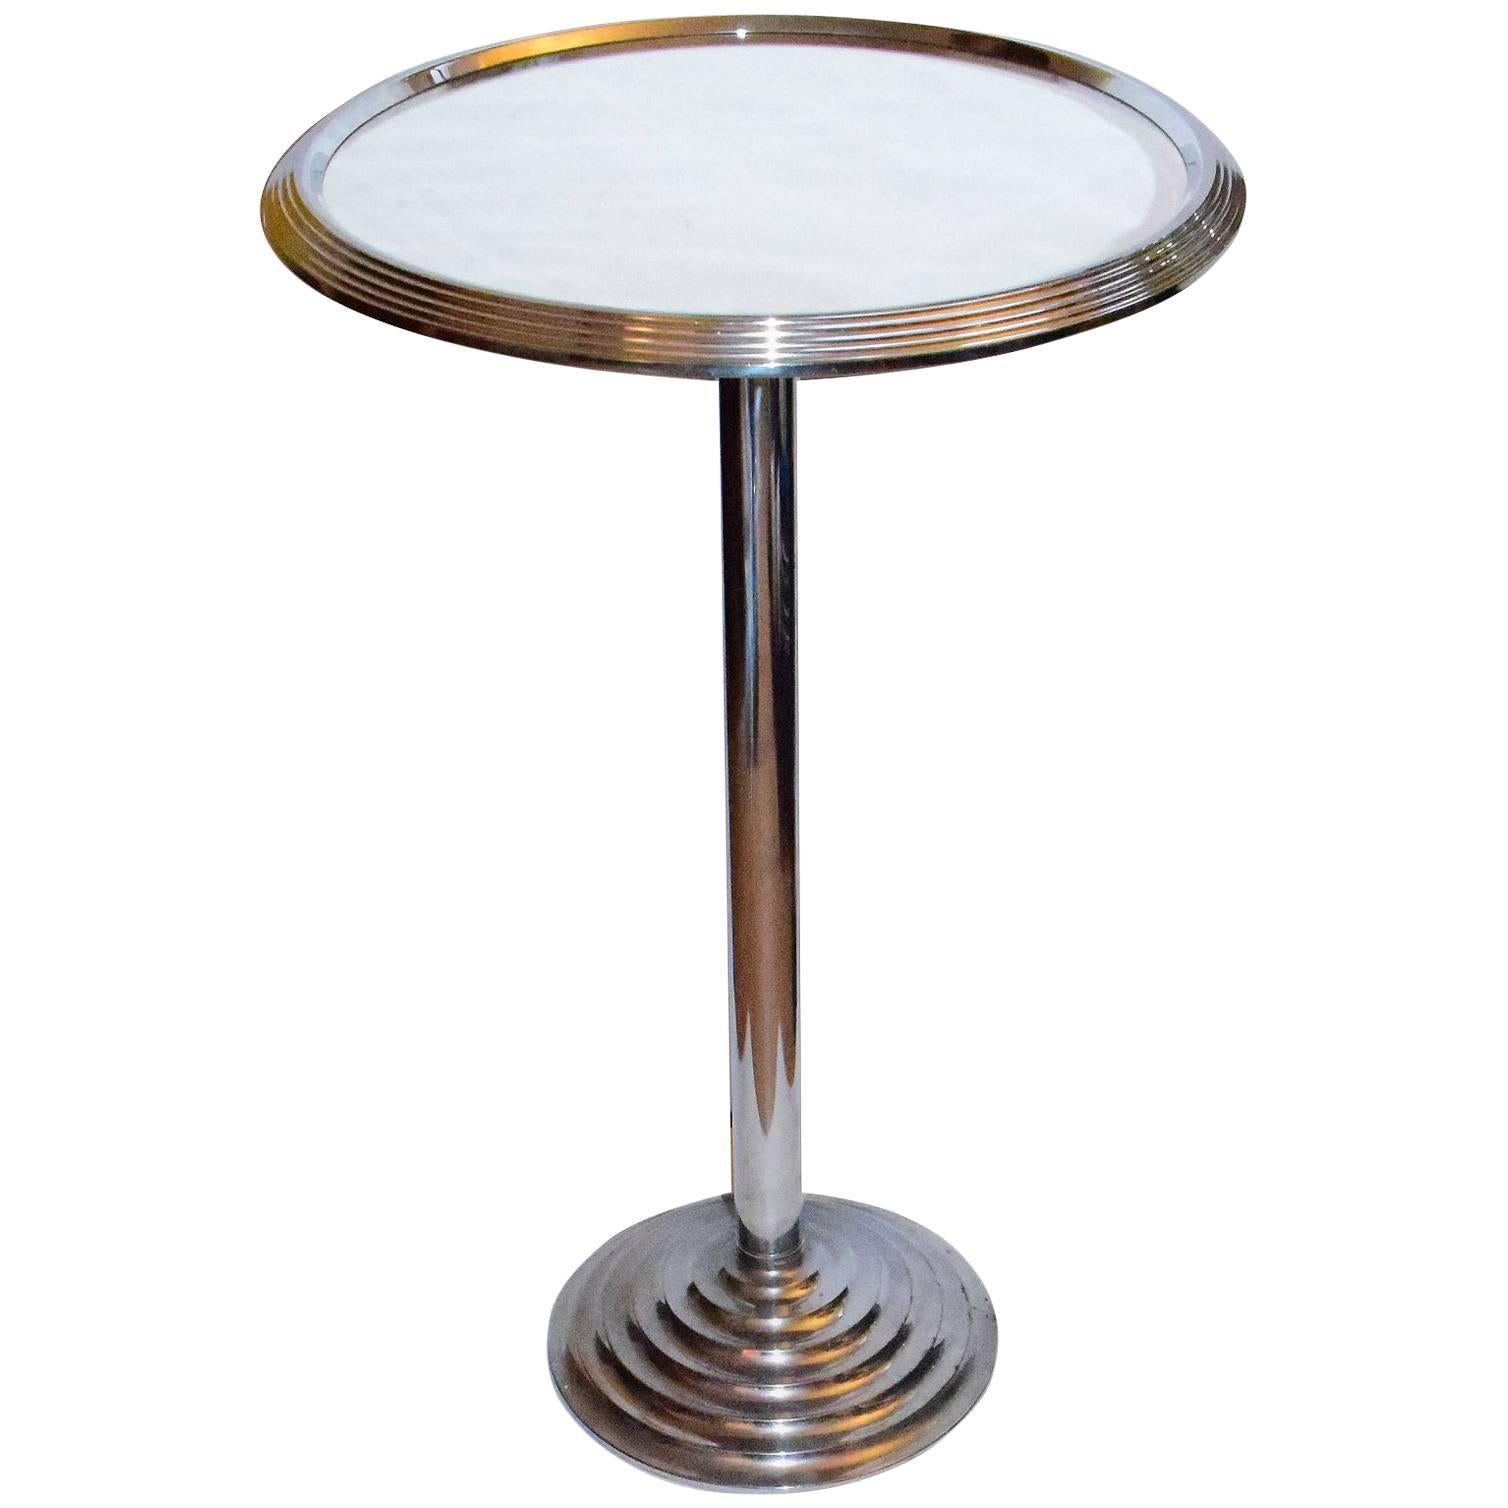 Antique French Art Deco Mirrored Chrome Cocktail Drinks Table